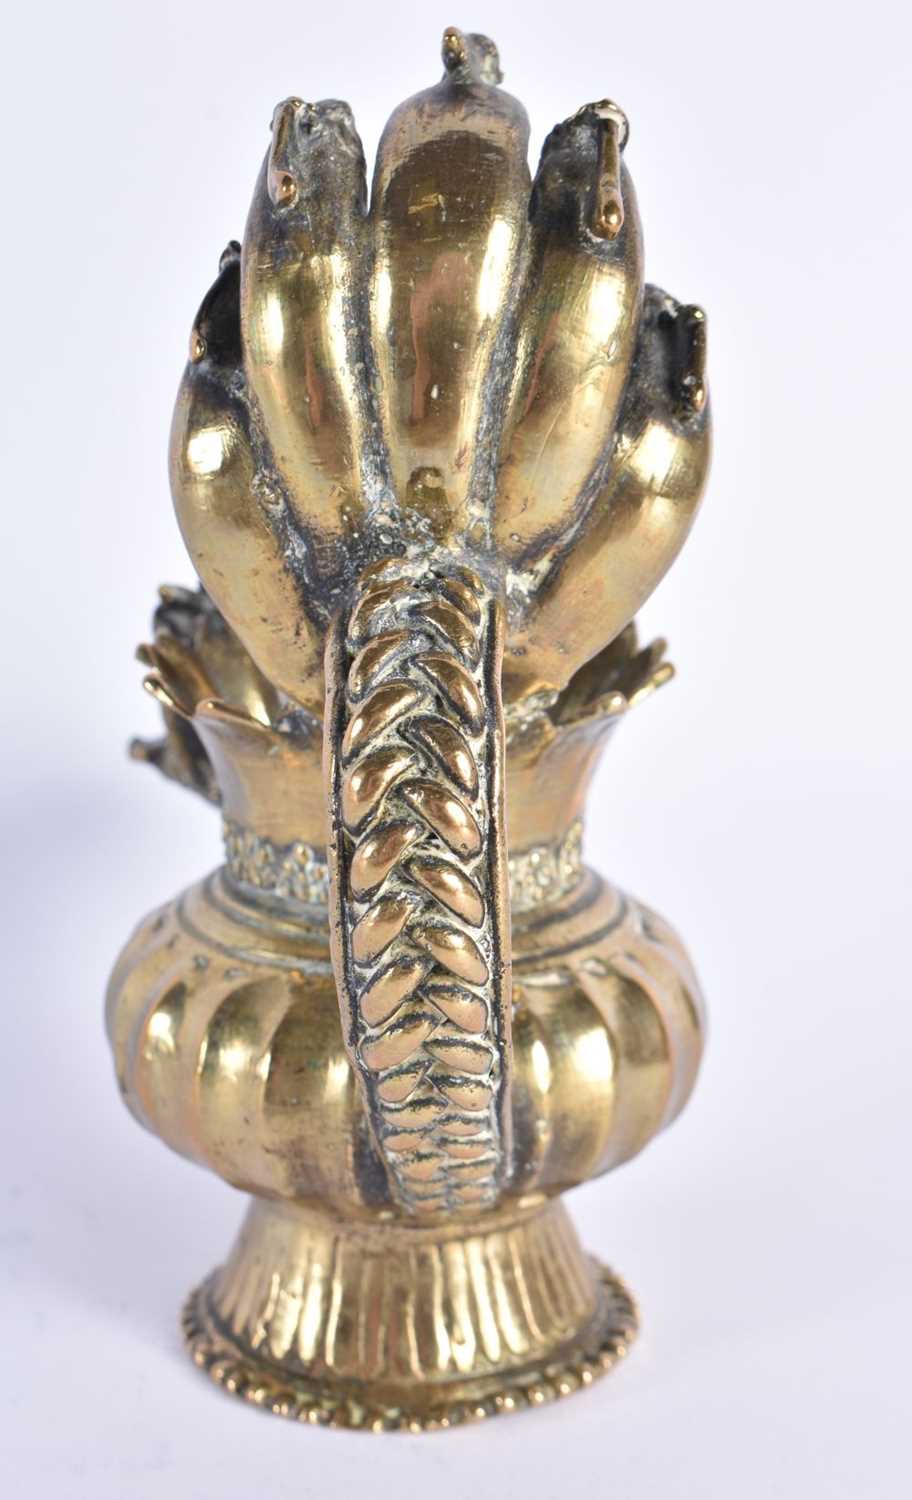 AN ANTIQUE INDIAN BRONZE HINDO DEITY VESSEL. 15 cm high. - Image 5 of 6